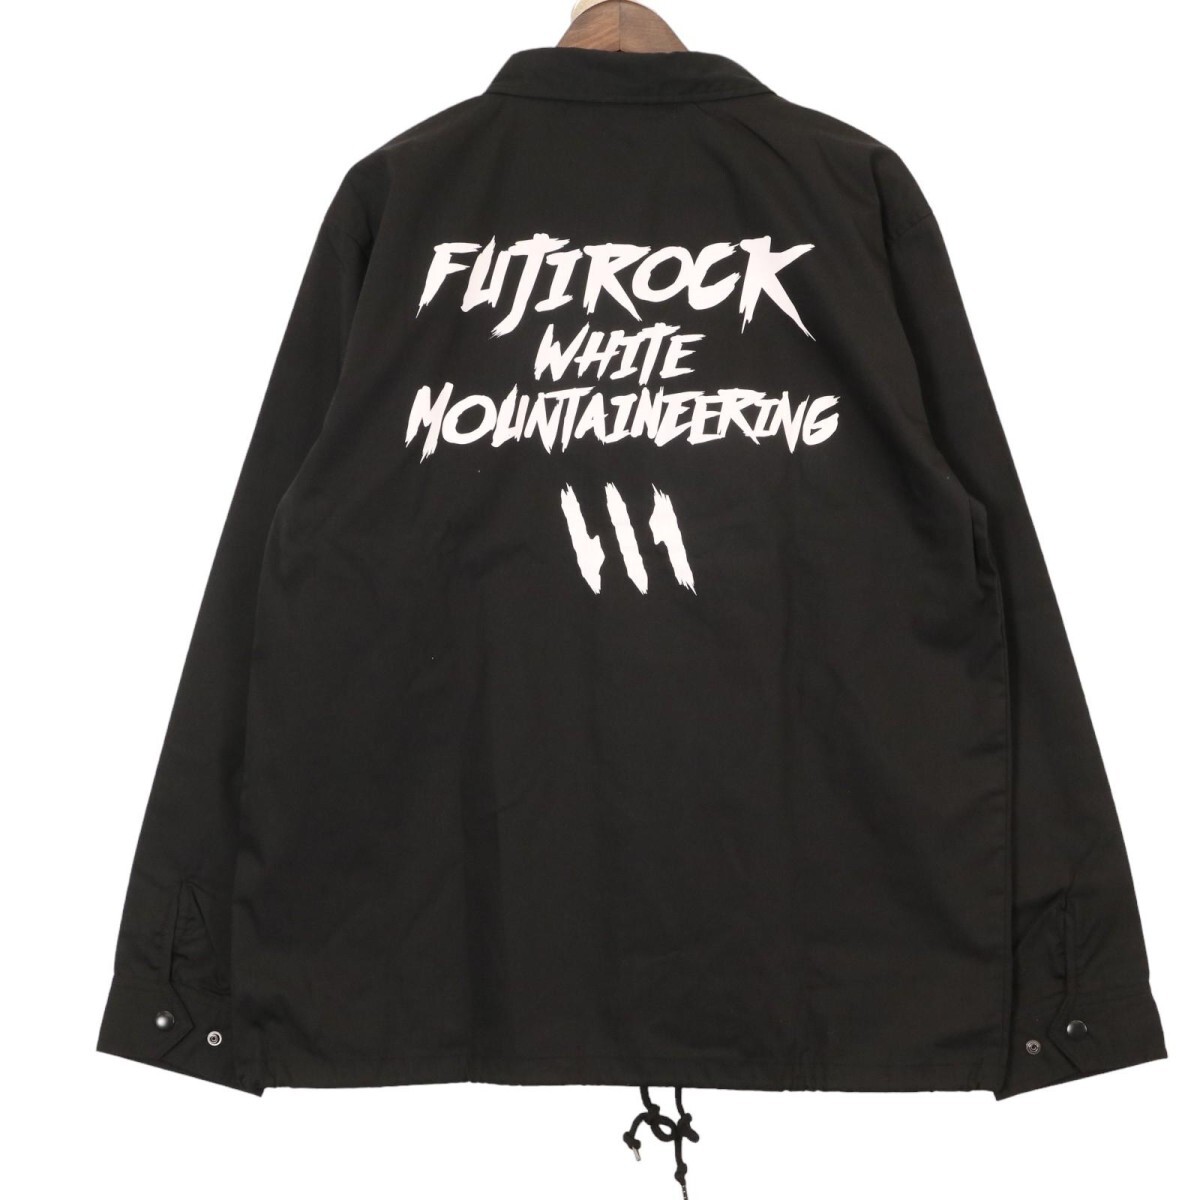 White Mountaineering × FUJI ROCK COLLECTION / coach jacket ホワイトマウンテニアリング フジロック 2019年 コーチジャケット_画像2